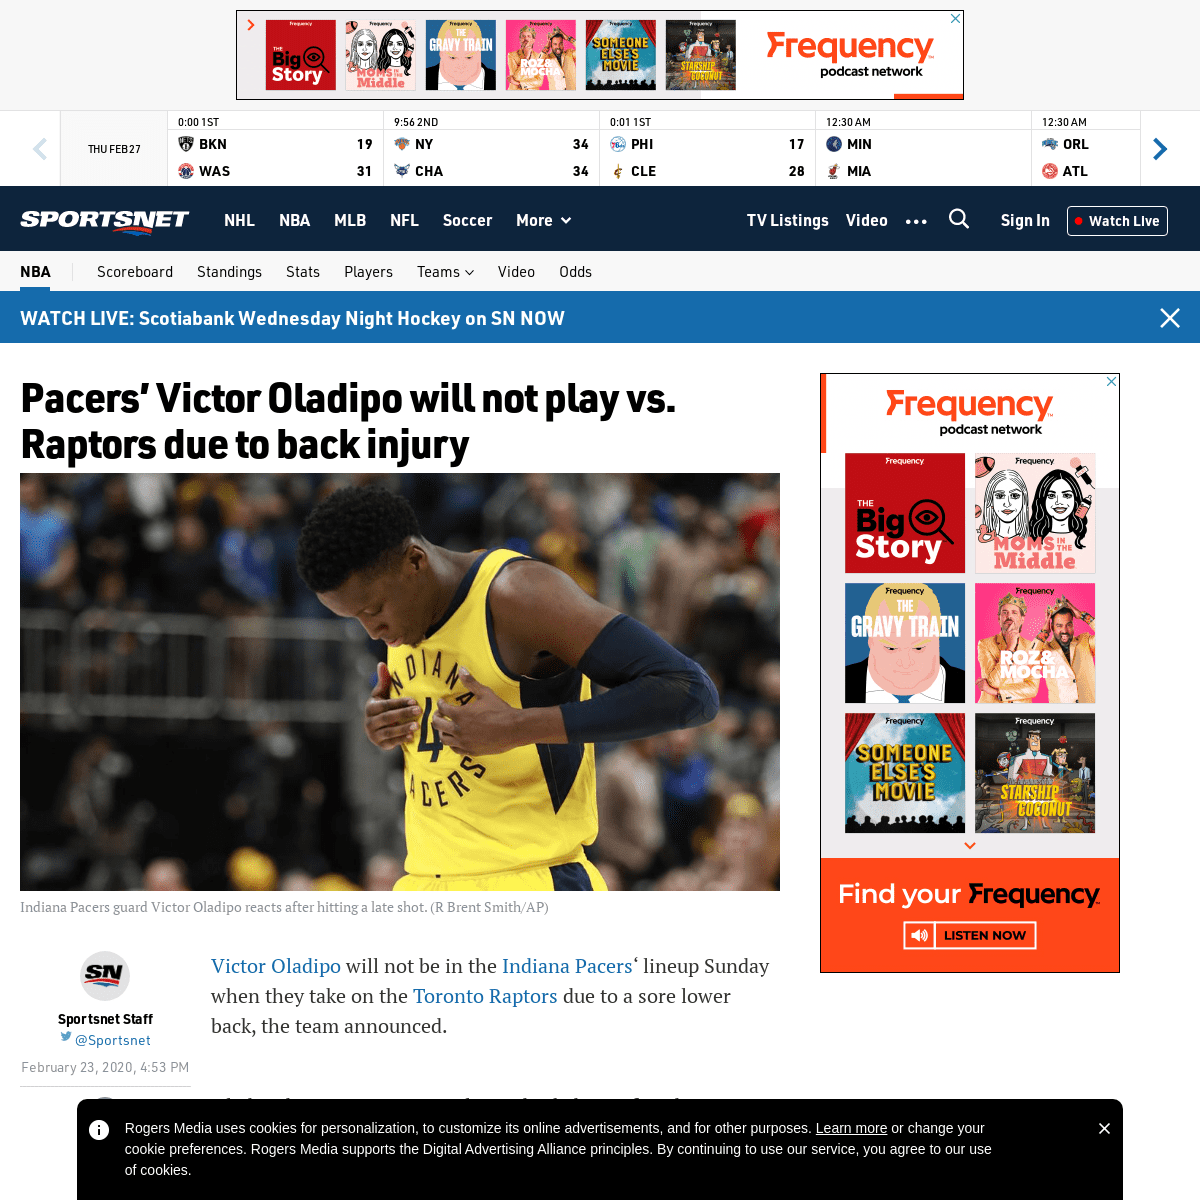 A complete backup of www.sportsnet.ca/basketball/nba/pacers-victor-oladipo-will-not-play-vs-raptors-due-back-injury/